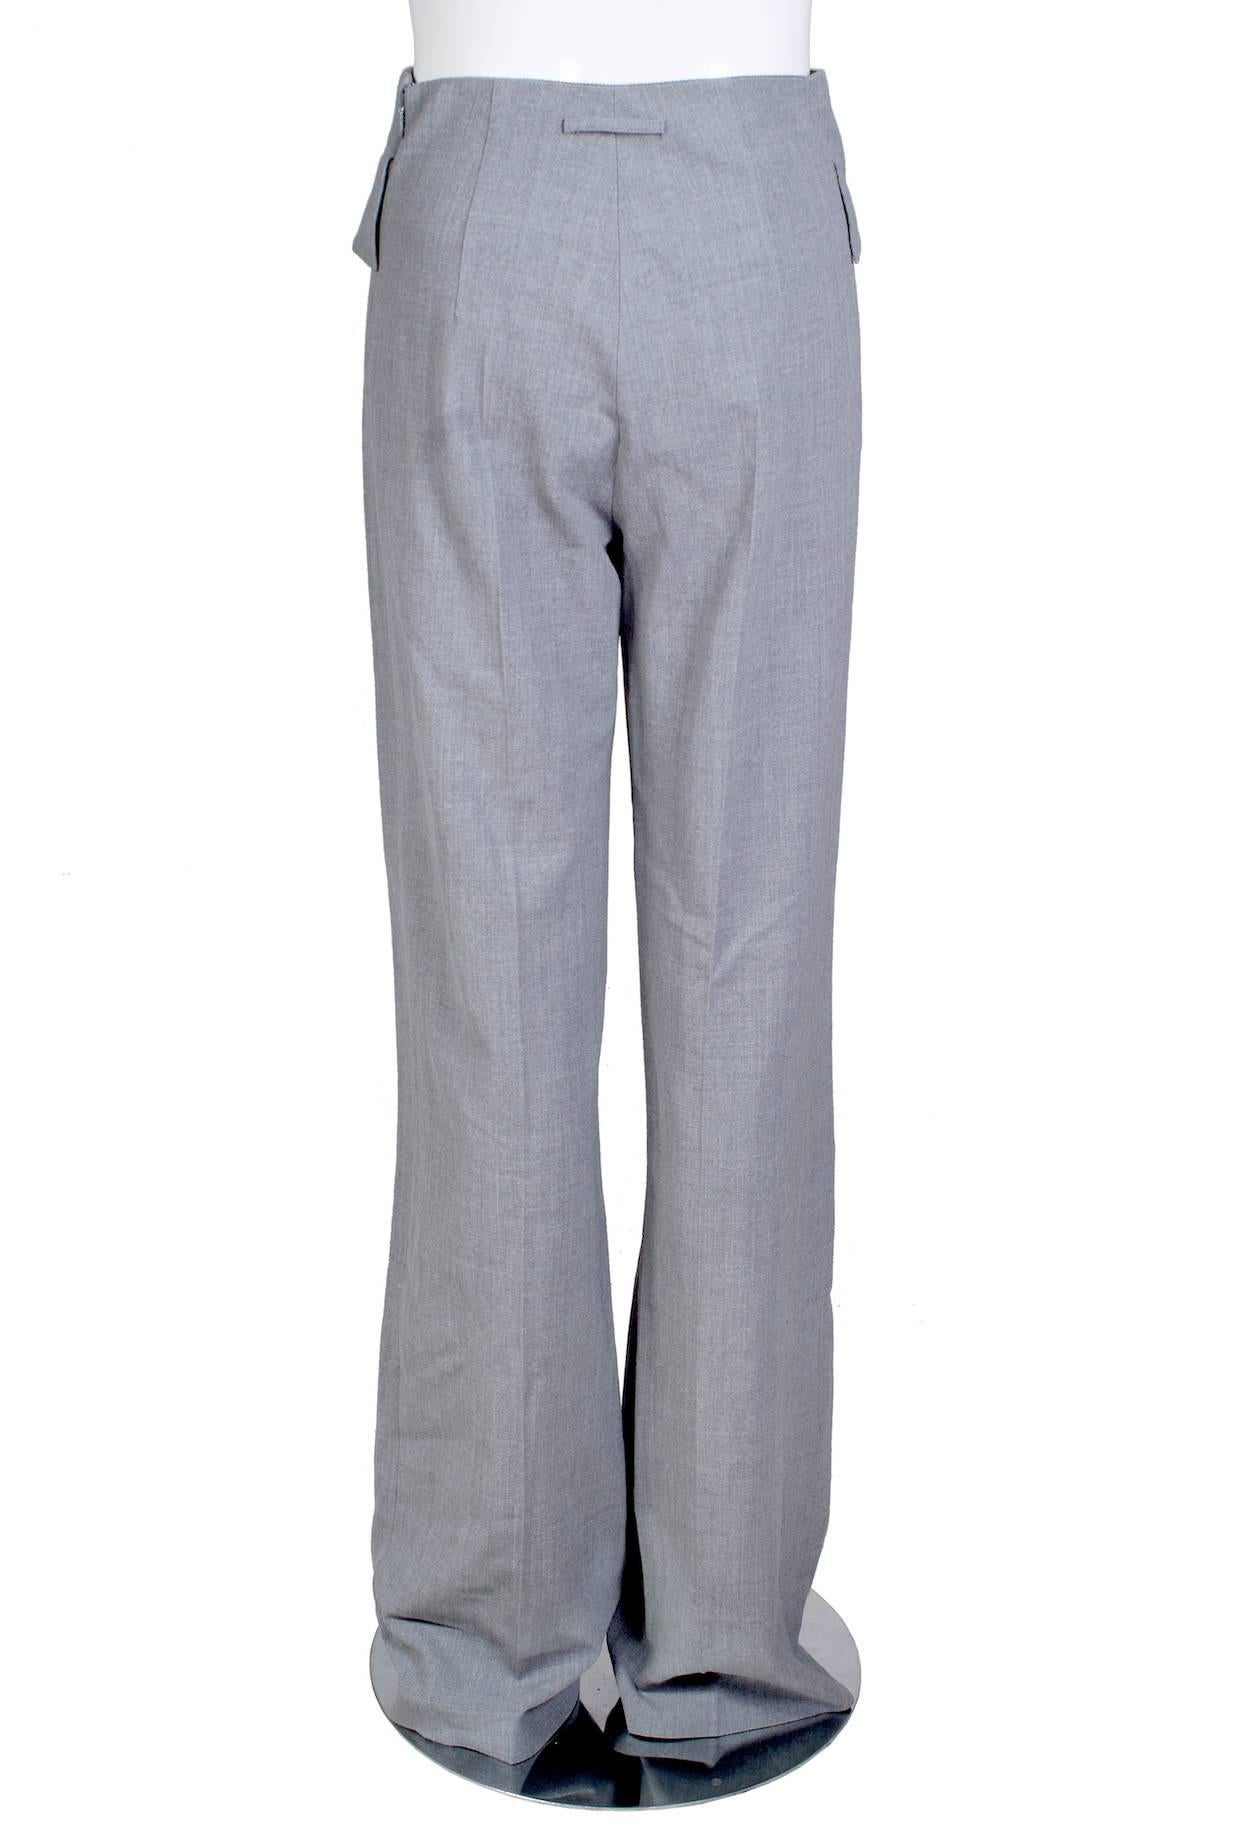 This is a pair of wool trousers by Jean Paul Gaultier c. 2000s.  It has twist lock flap closure pockets and a wide leg.  

11